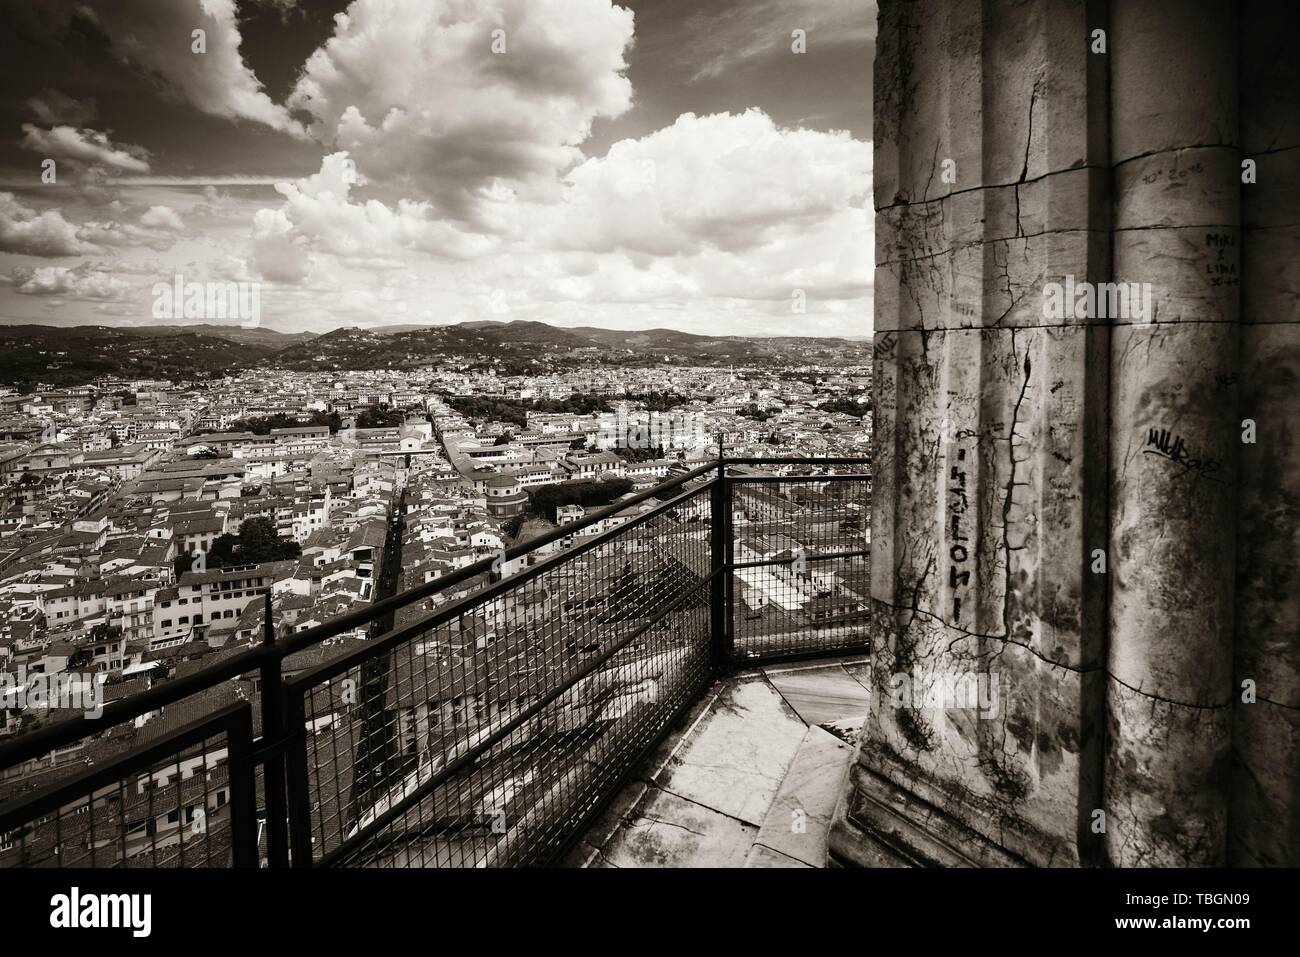 Duomo Santa Maria Del Fiore in Florence Italy viewed from top of dome. Stock Photo